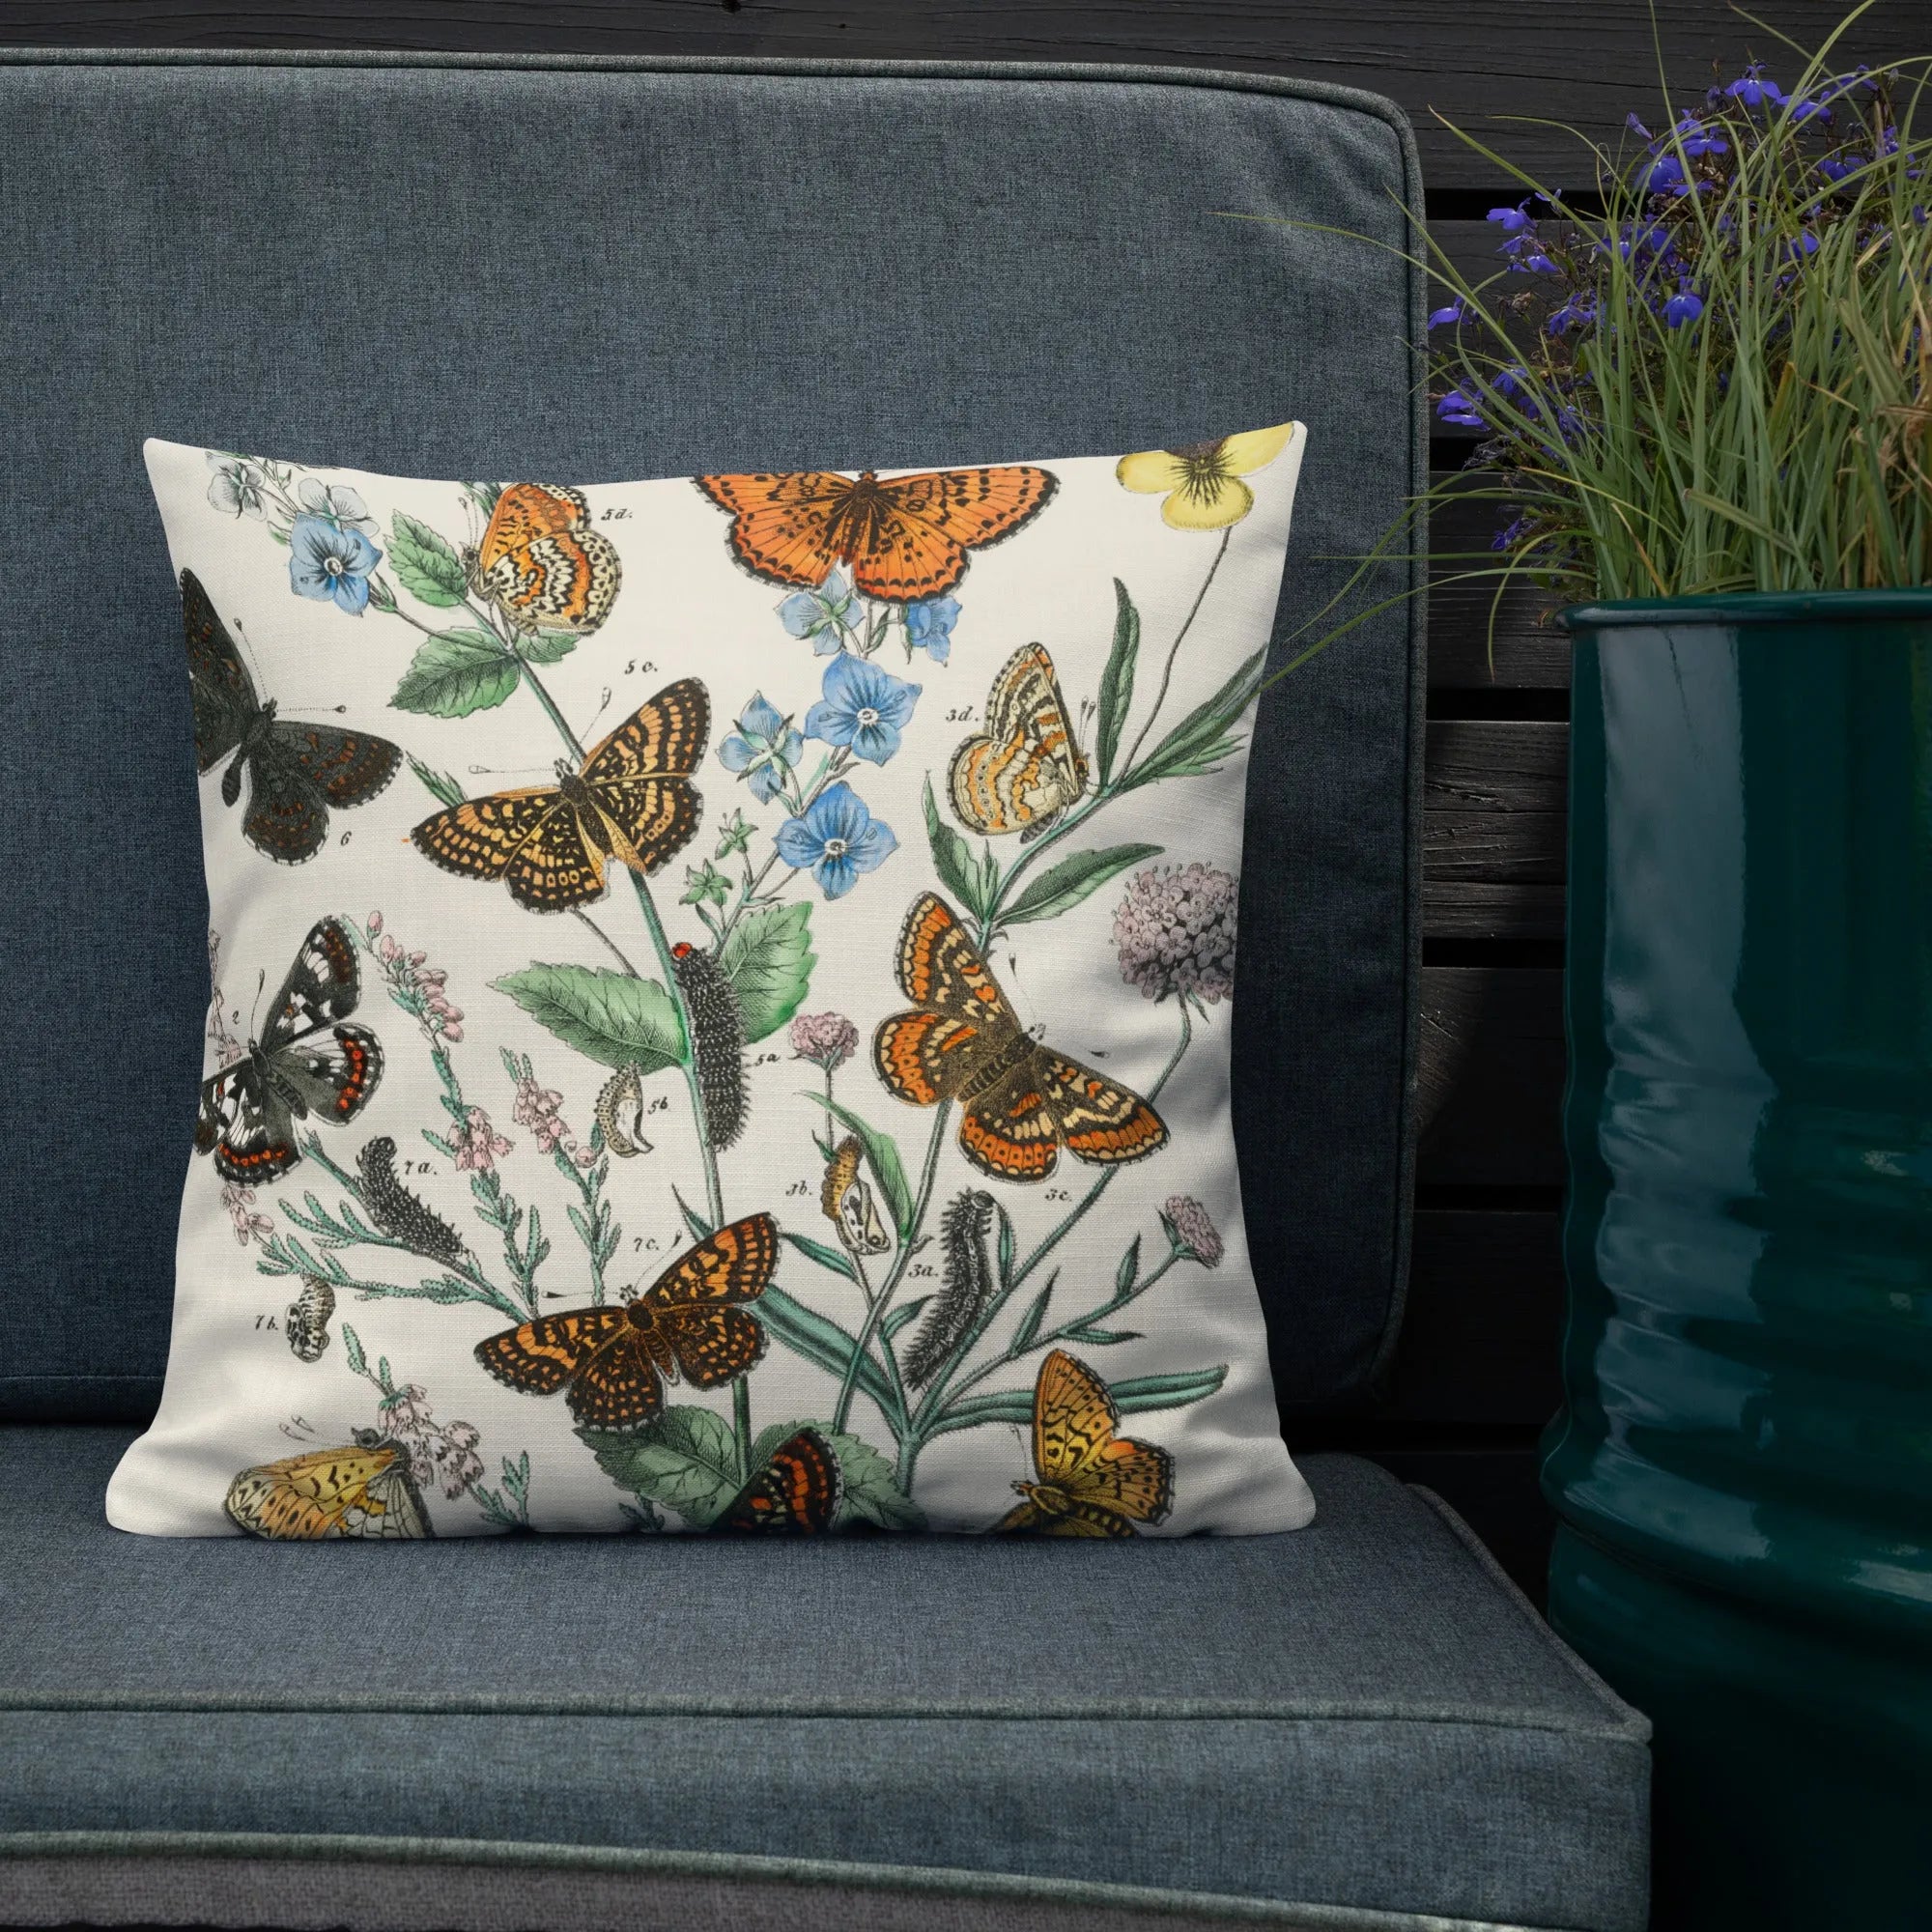 European Butterflies And Moths 2 By William Forsell Kirby Cushion - Throw Pillows - Aesthetic Art